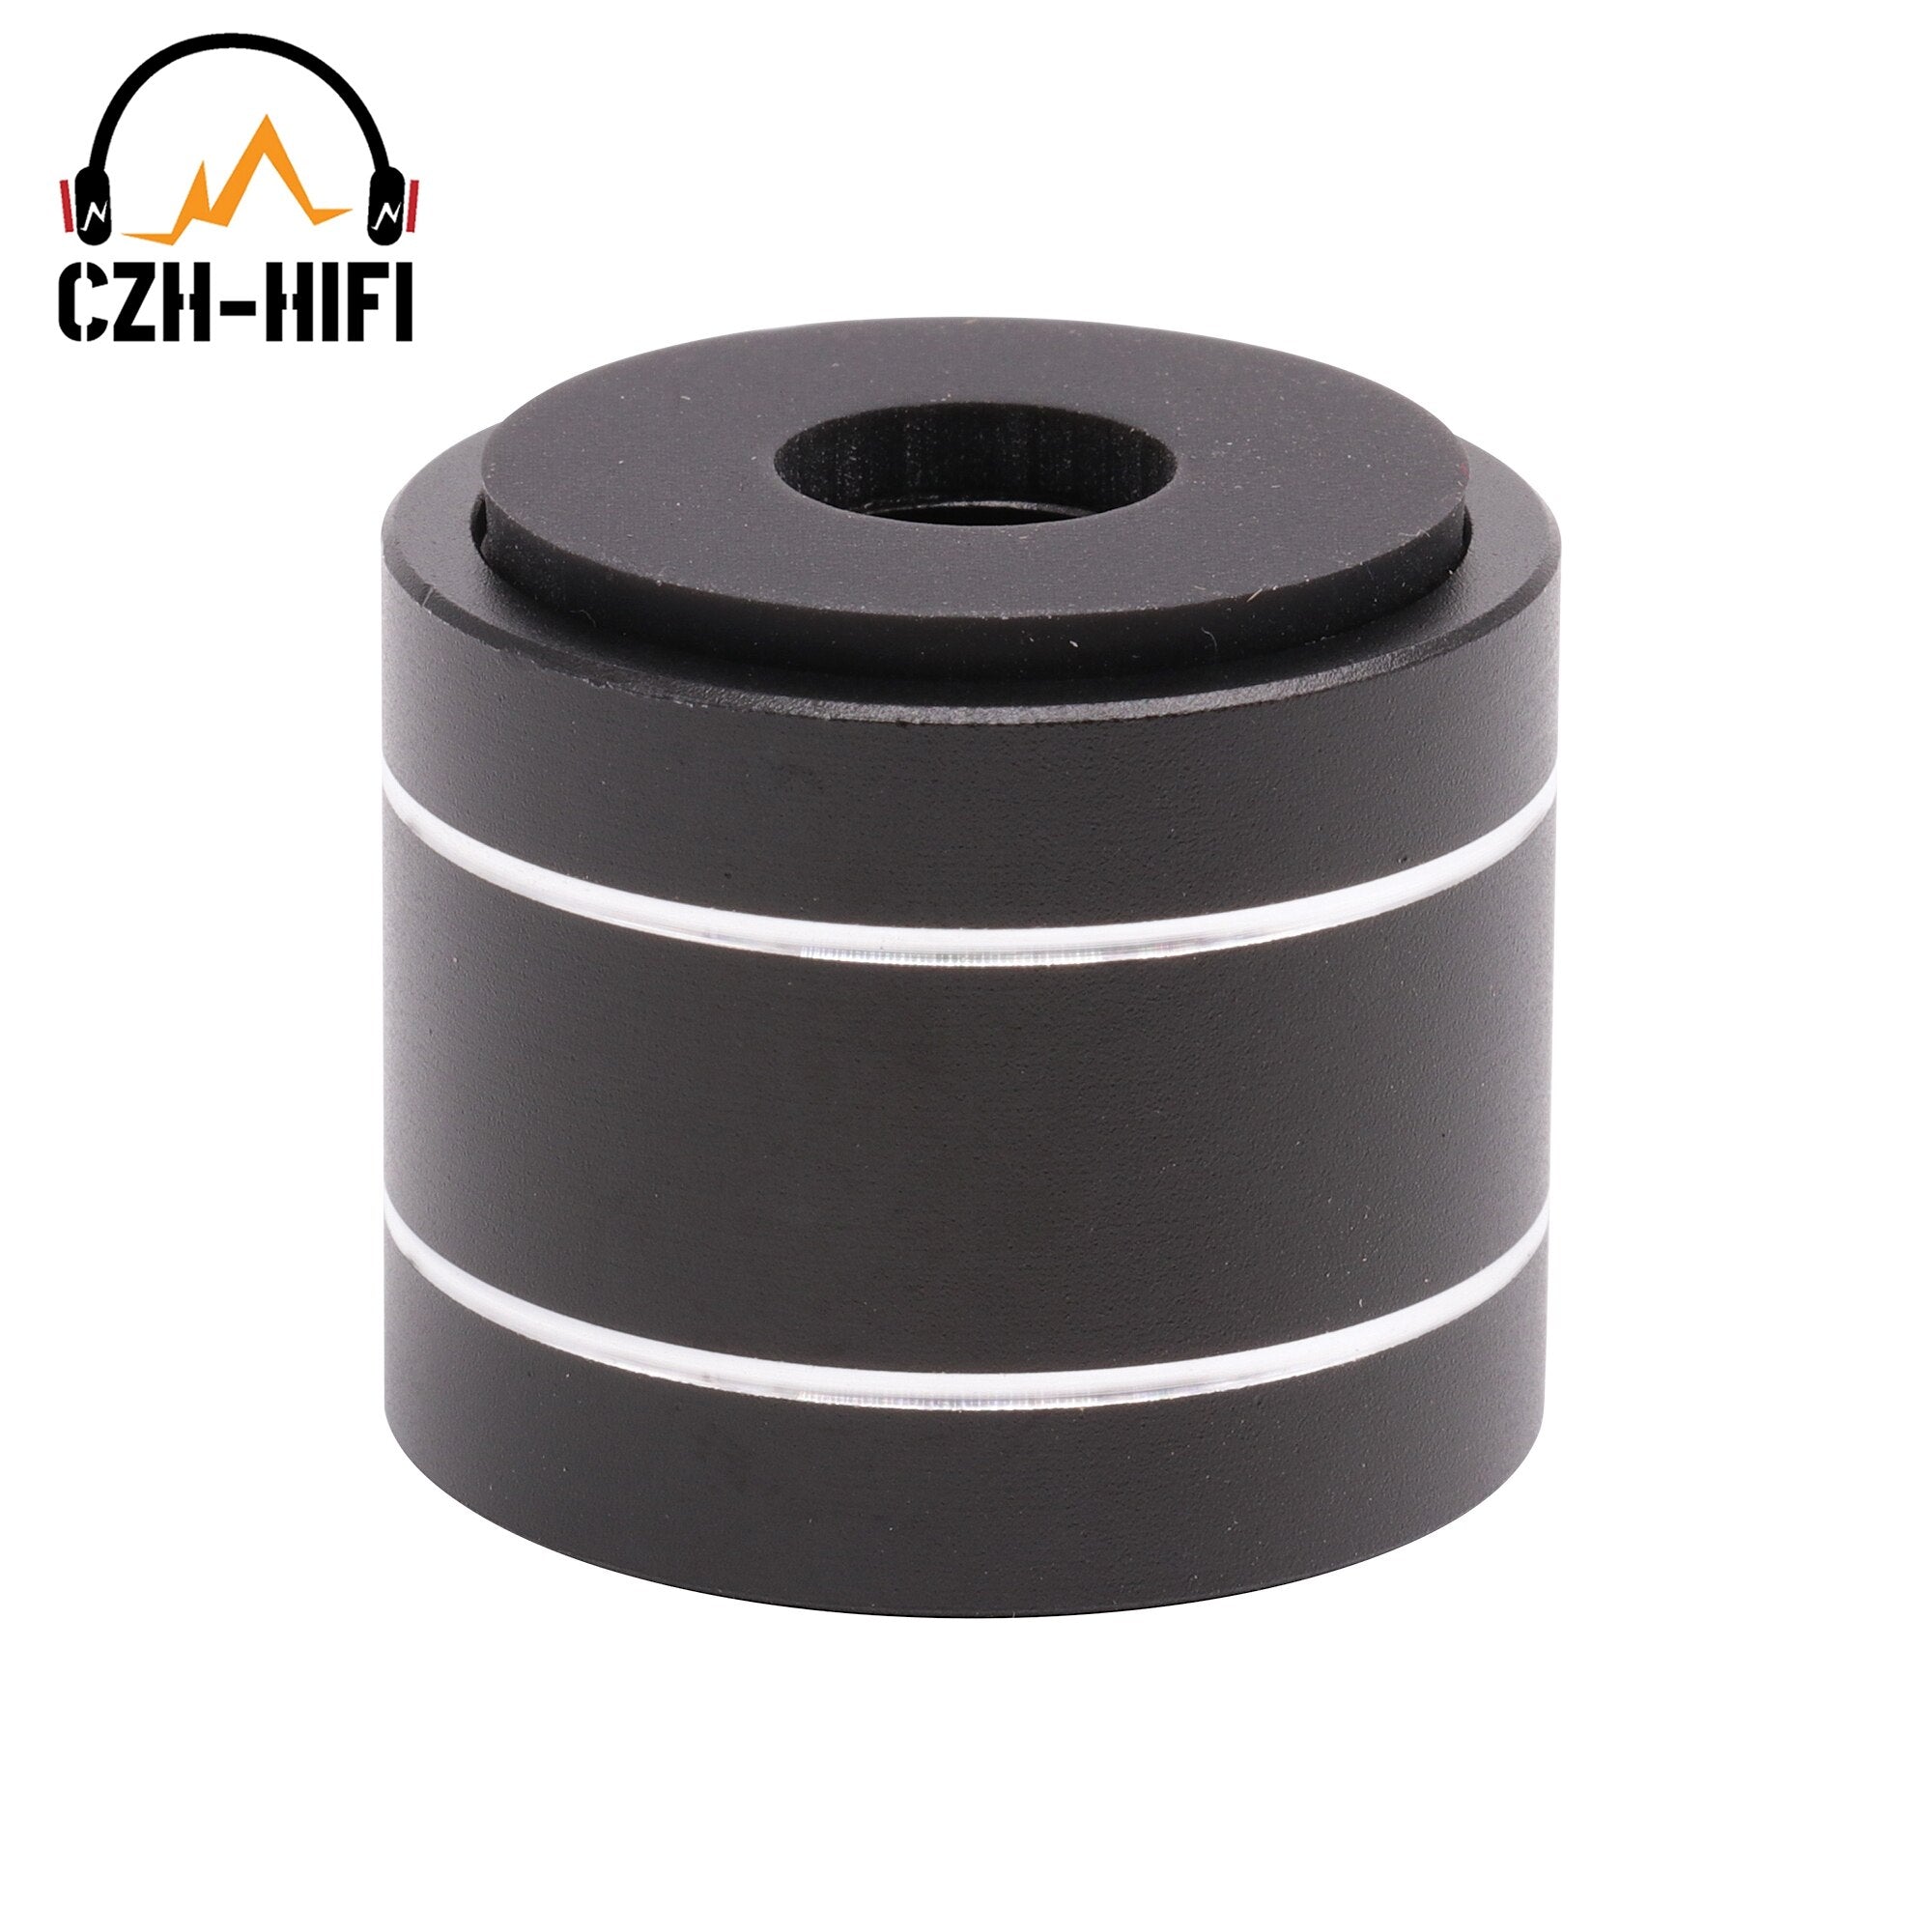 30x25mm CNC Machined Solid Aluminum Isolation Stand Base Feet Pad for Subwoofer Audio Speaker Turntable DAC Amplifier PC CD DIY